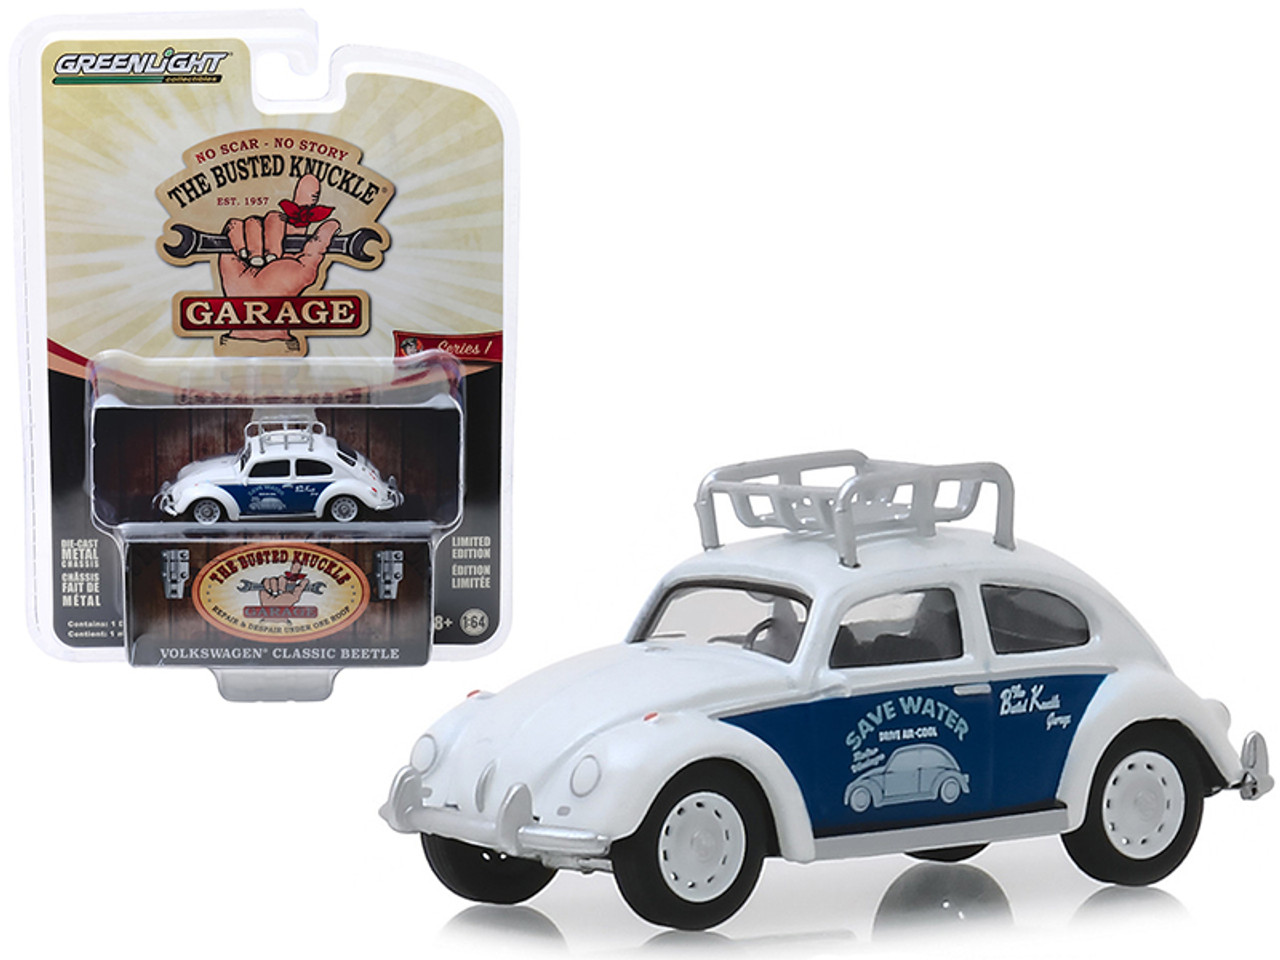 Classic Volkswagen Beetle with Roof Rack White "Save Water" "Busted Knuckle Garage" Series 1 1/64 Diecast Model Car by Greenlight